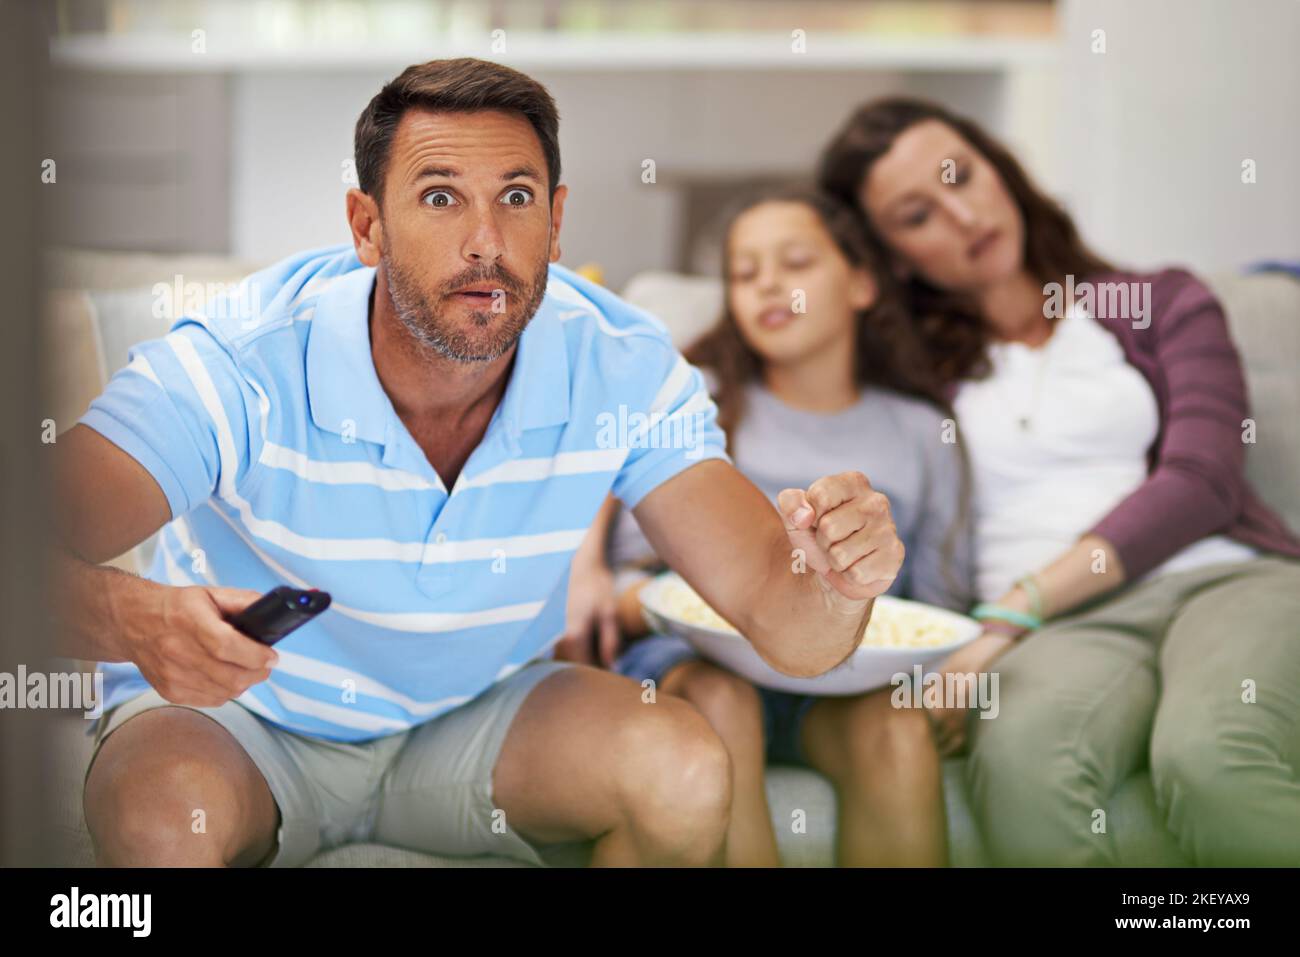 When theyre asleep, its sports time. a family sitting on the sofa at home. Stock Photo